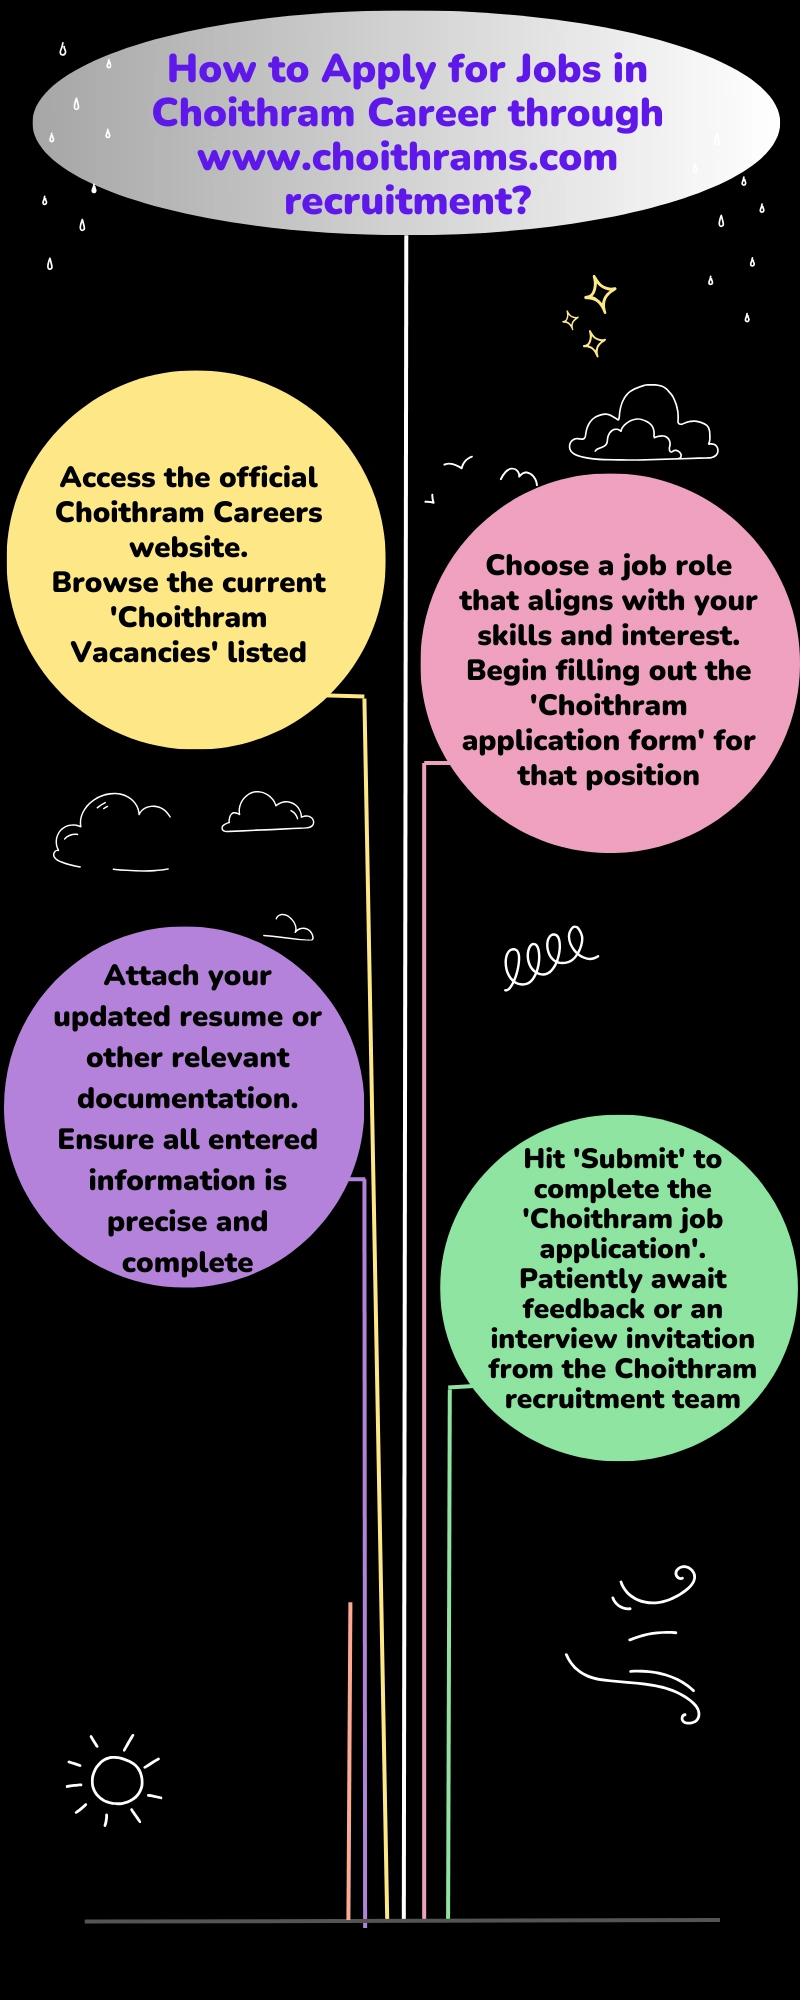 How to Apply for Jobs in Choithram Career through www.choithrams.com recruitment?